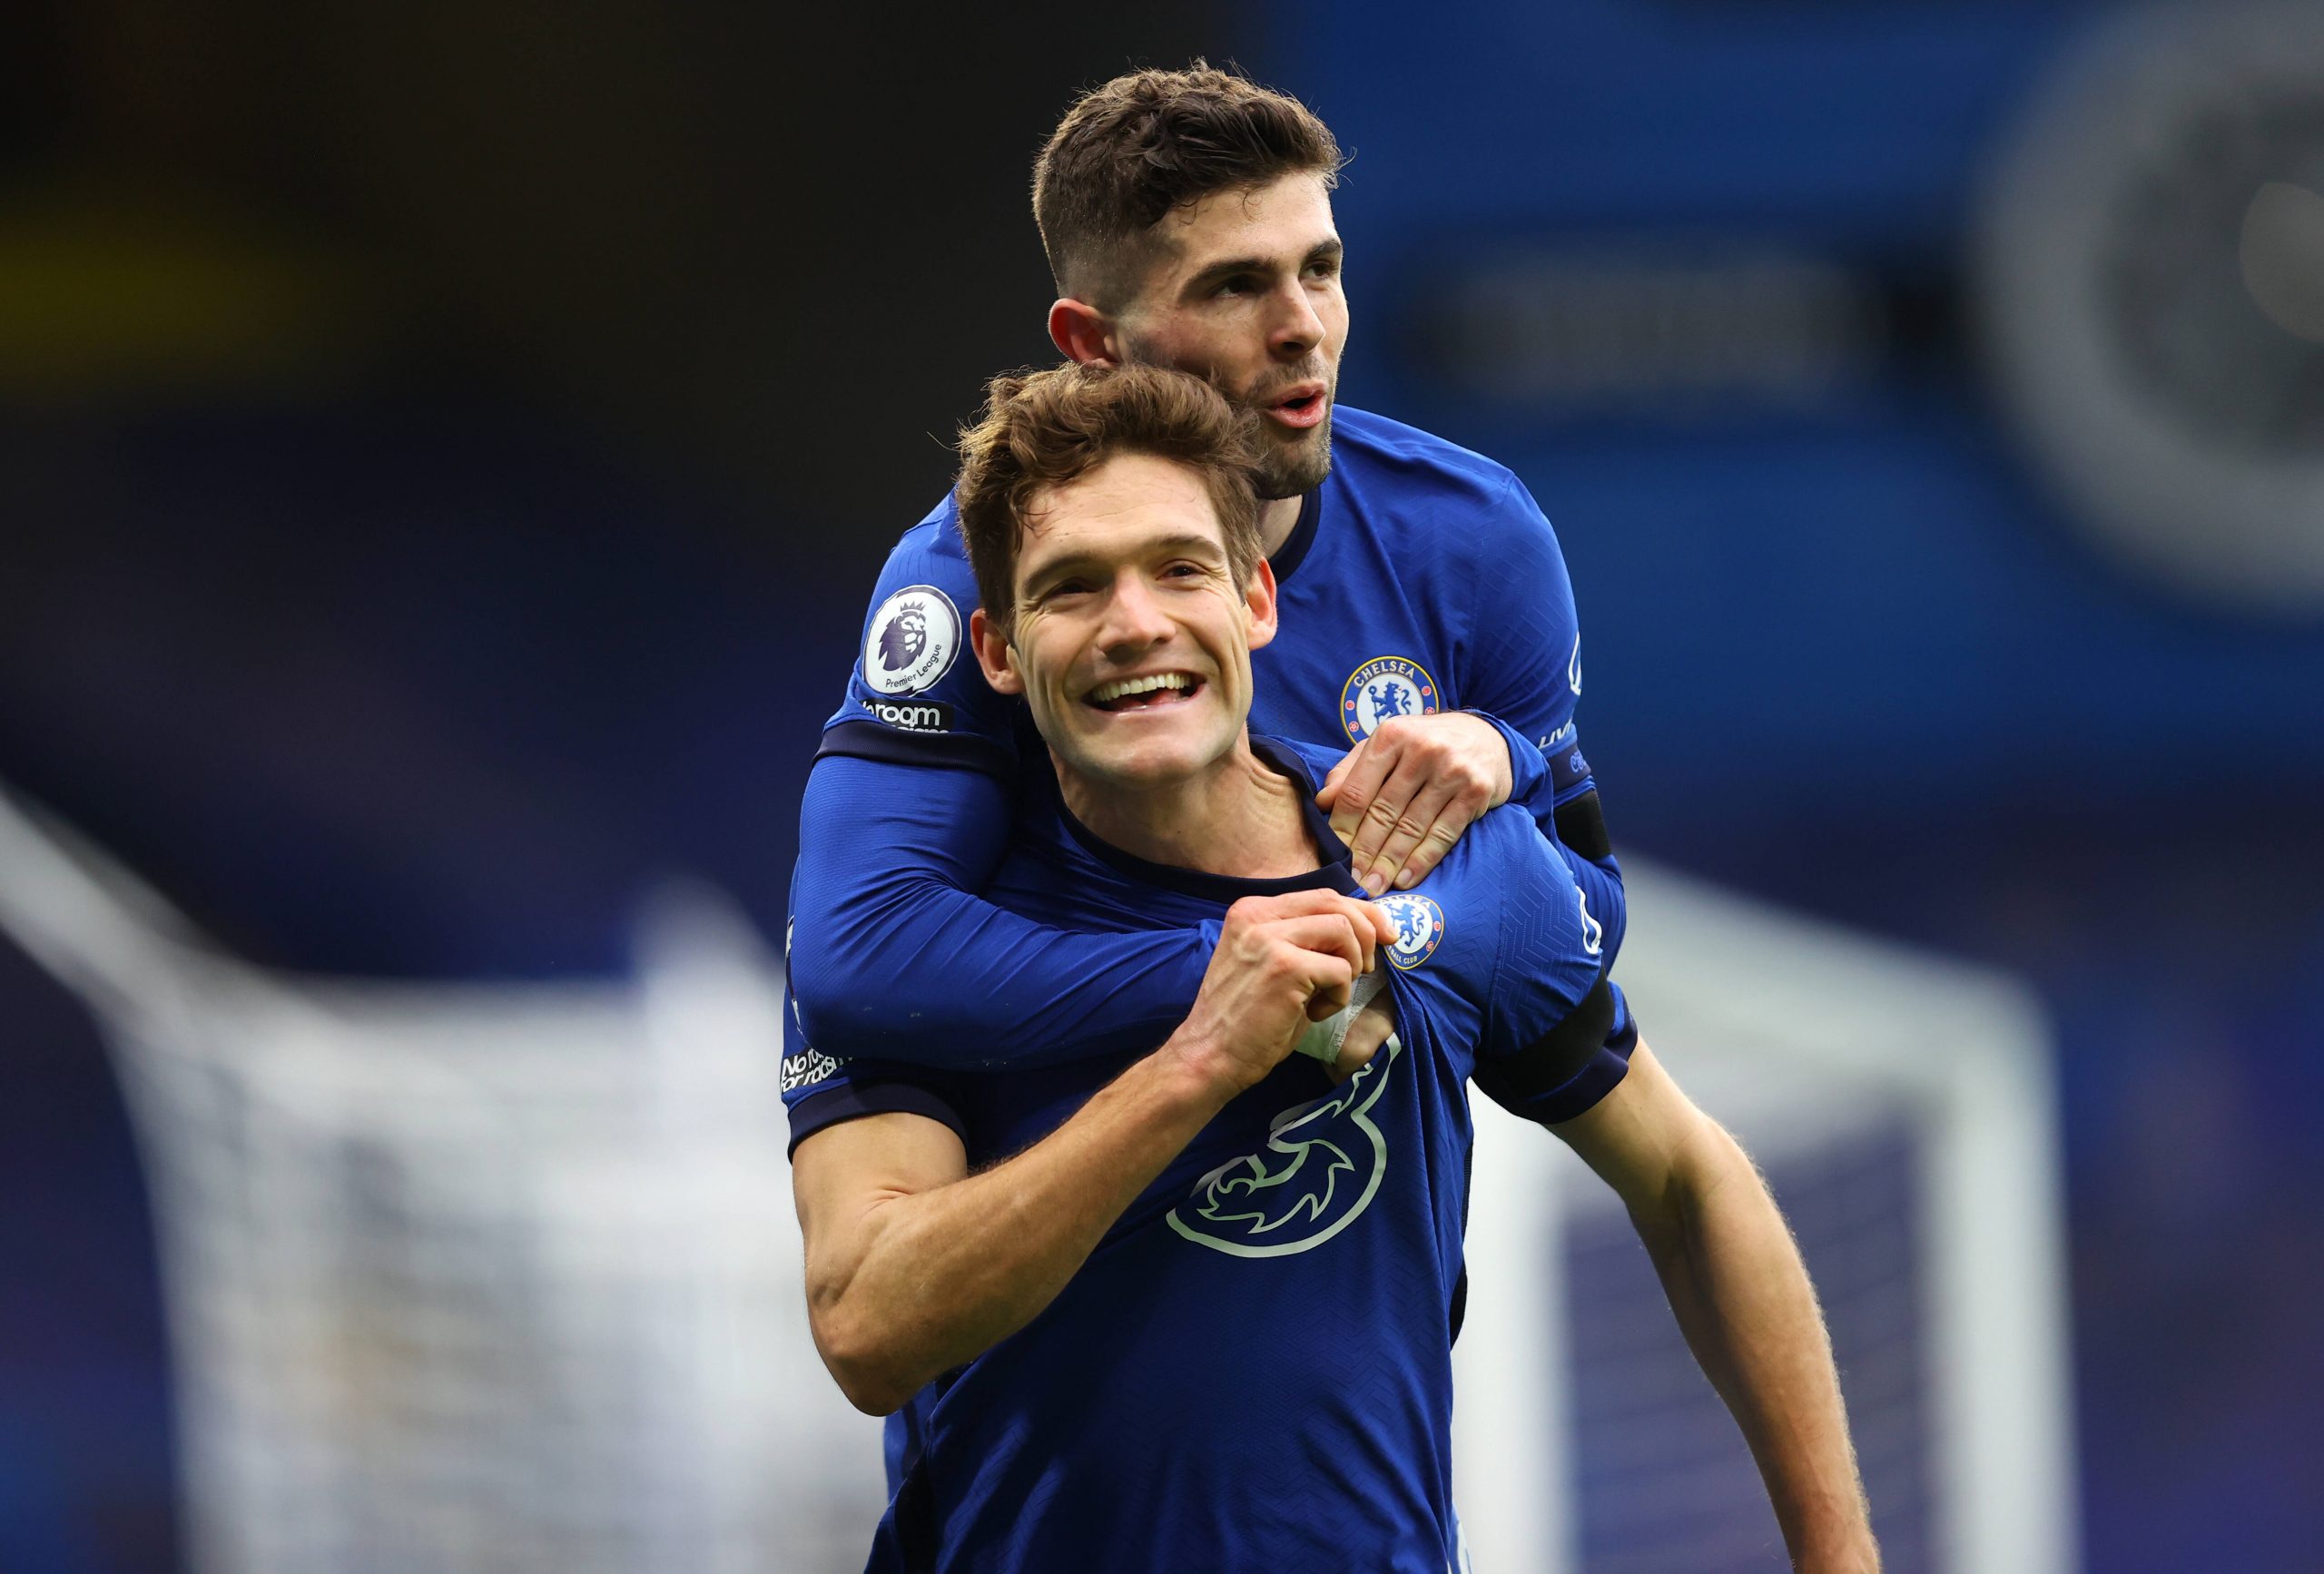 Marcos Alonso set for Barcelona move after terminating Chelsea contract by mutual consent.